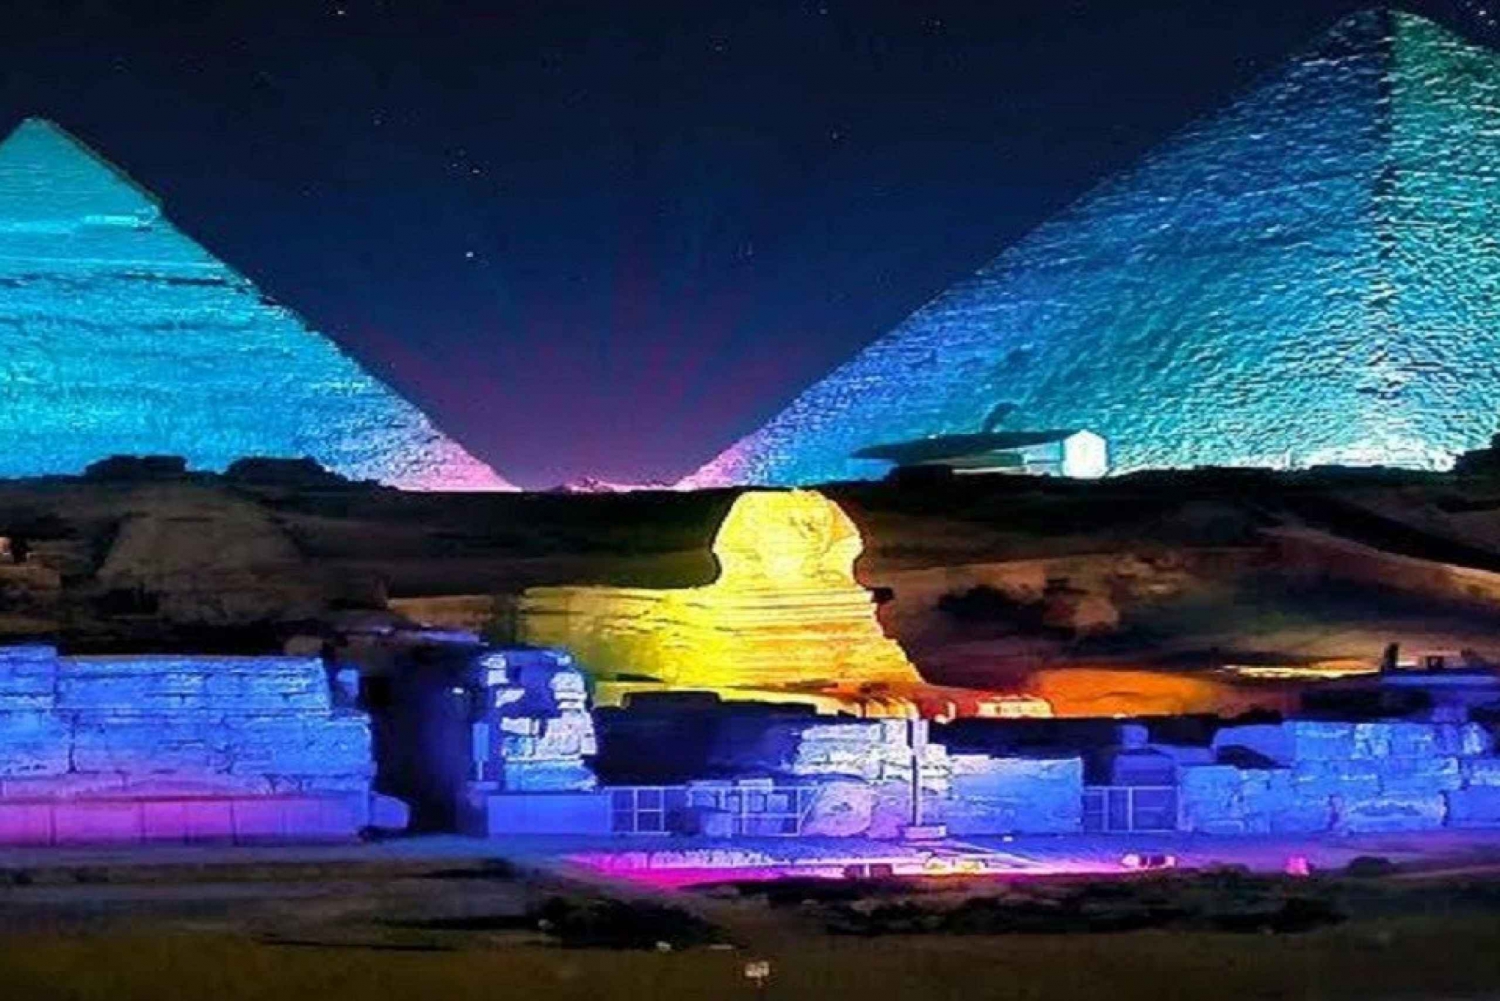 Cairo: Sound and Light Show at Giza Pyramids with Transfers